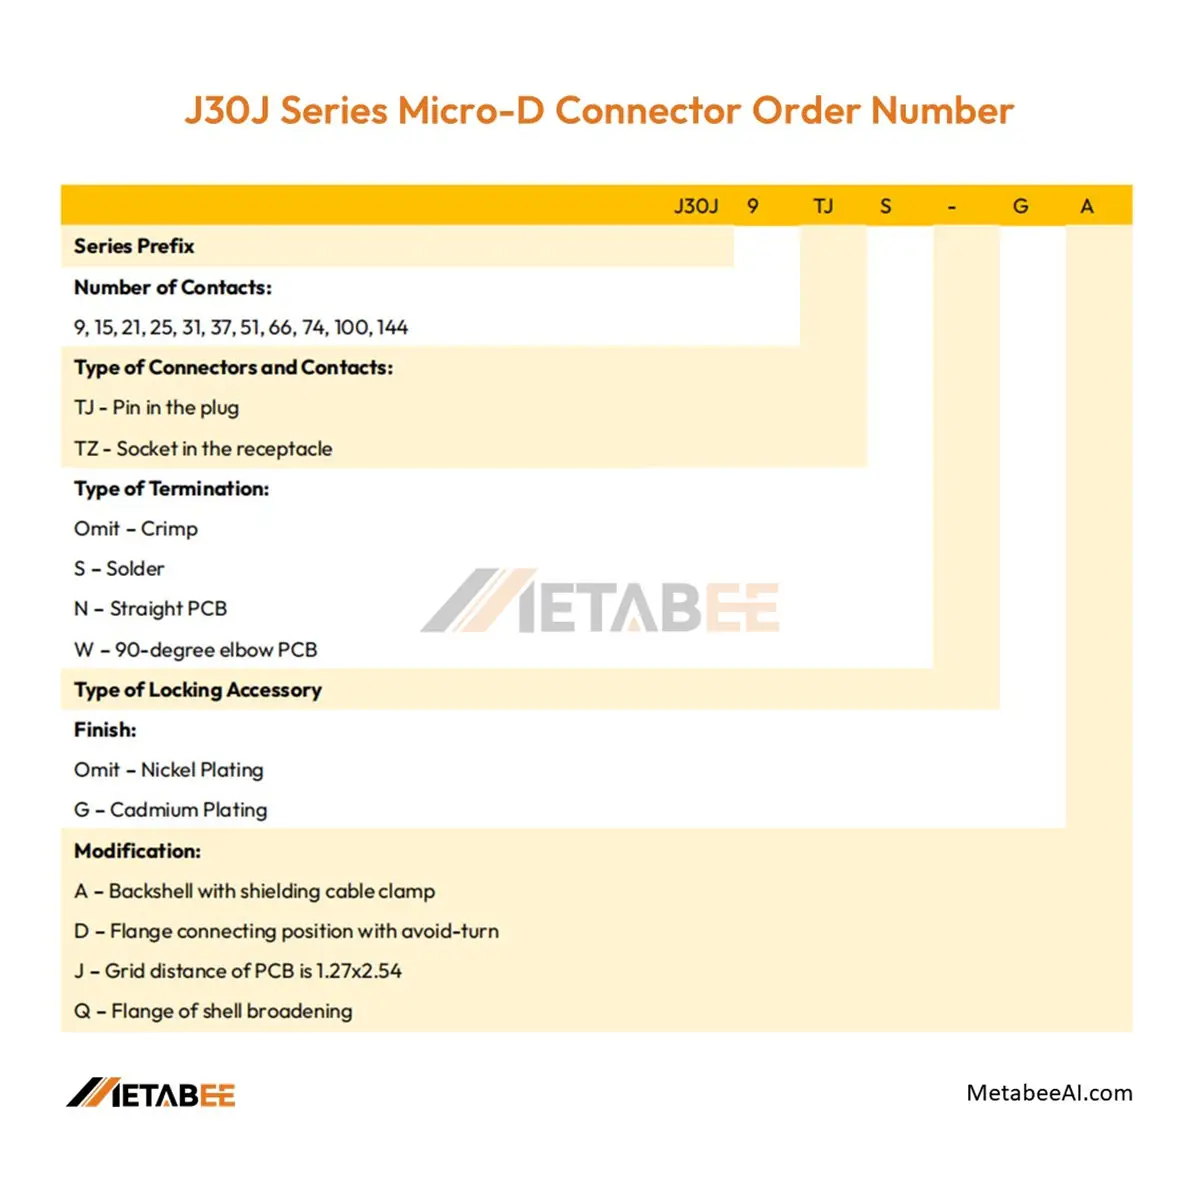 J30J Micro-D Connector Order Number